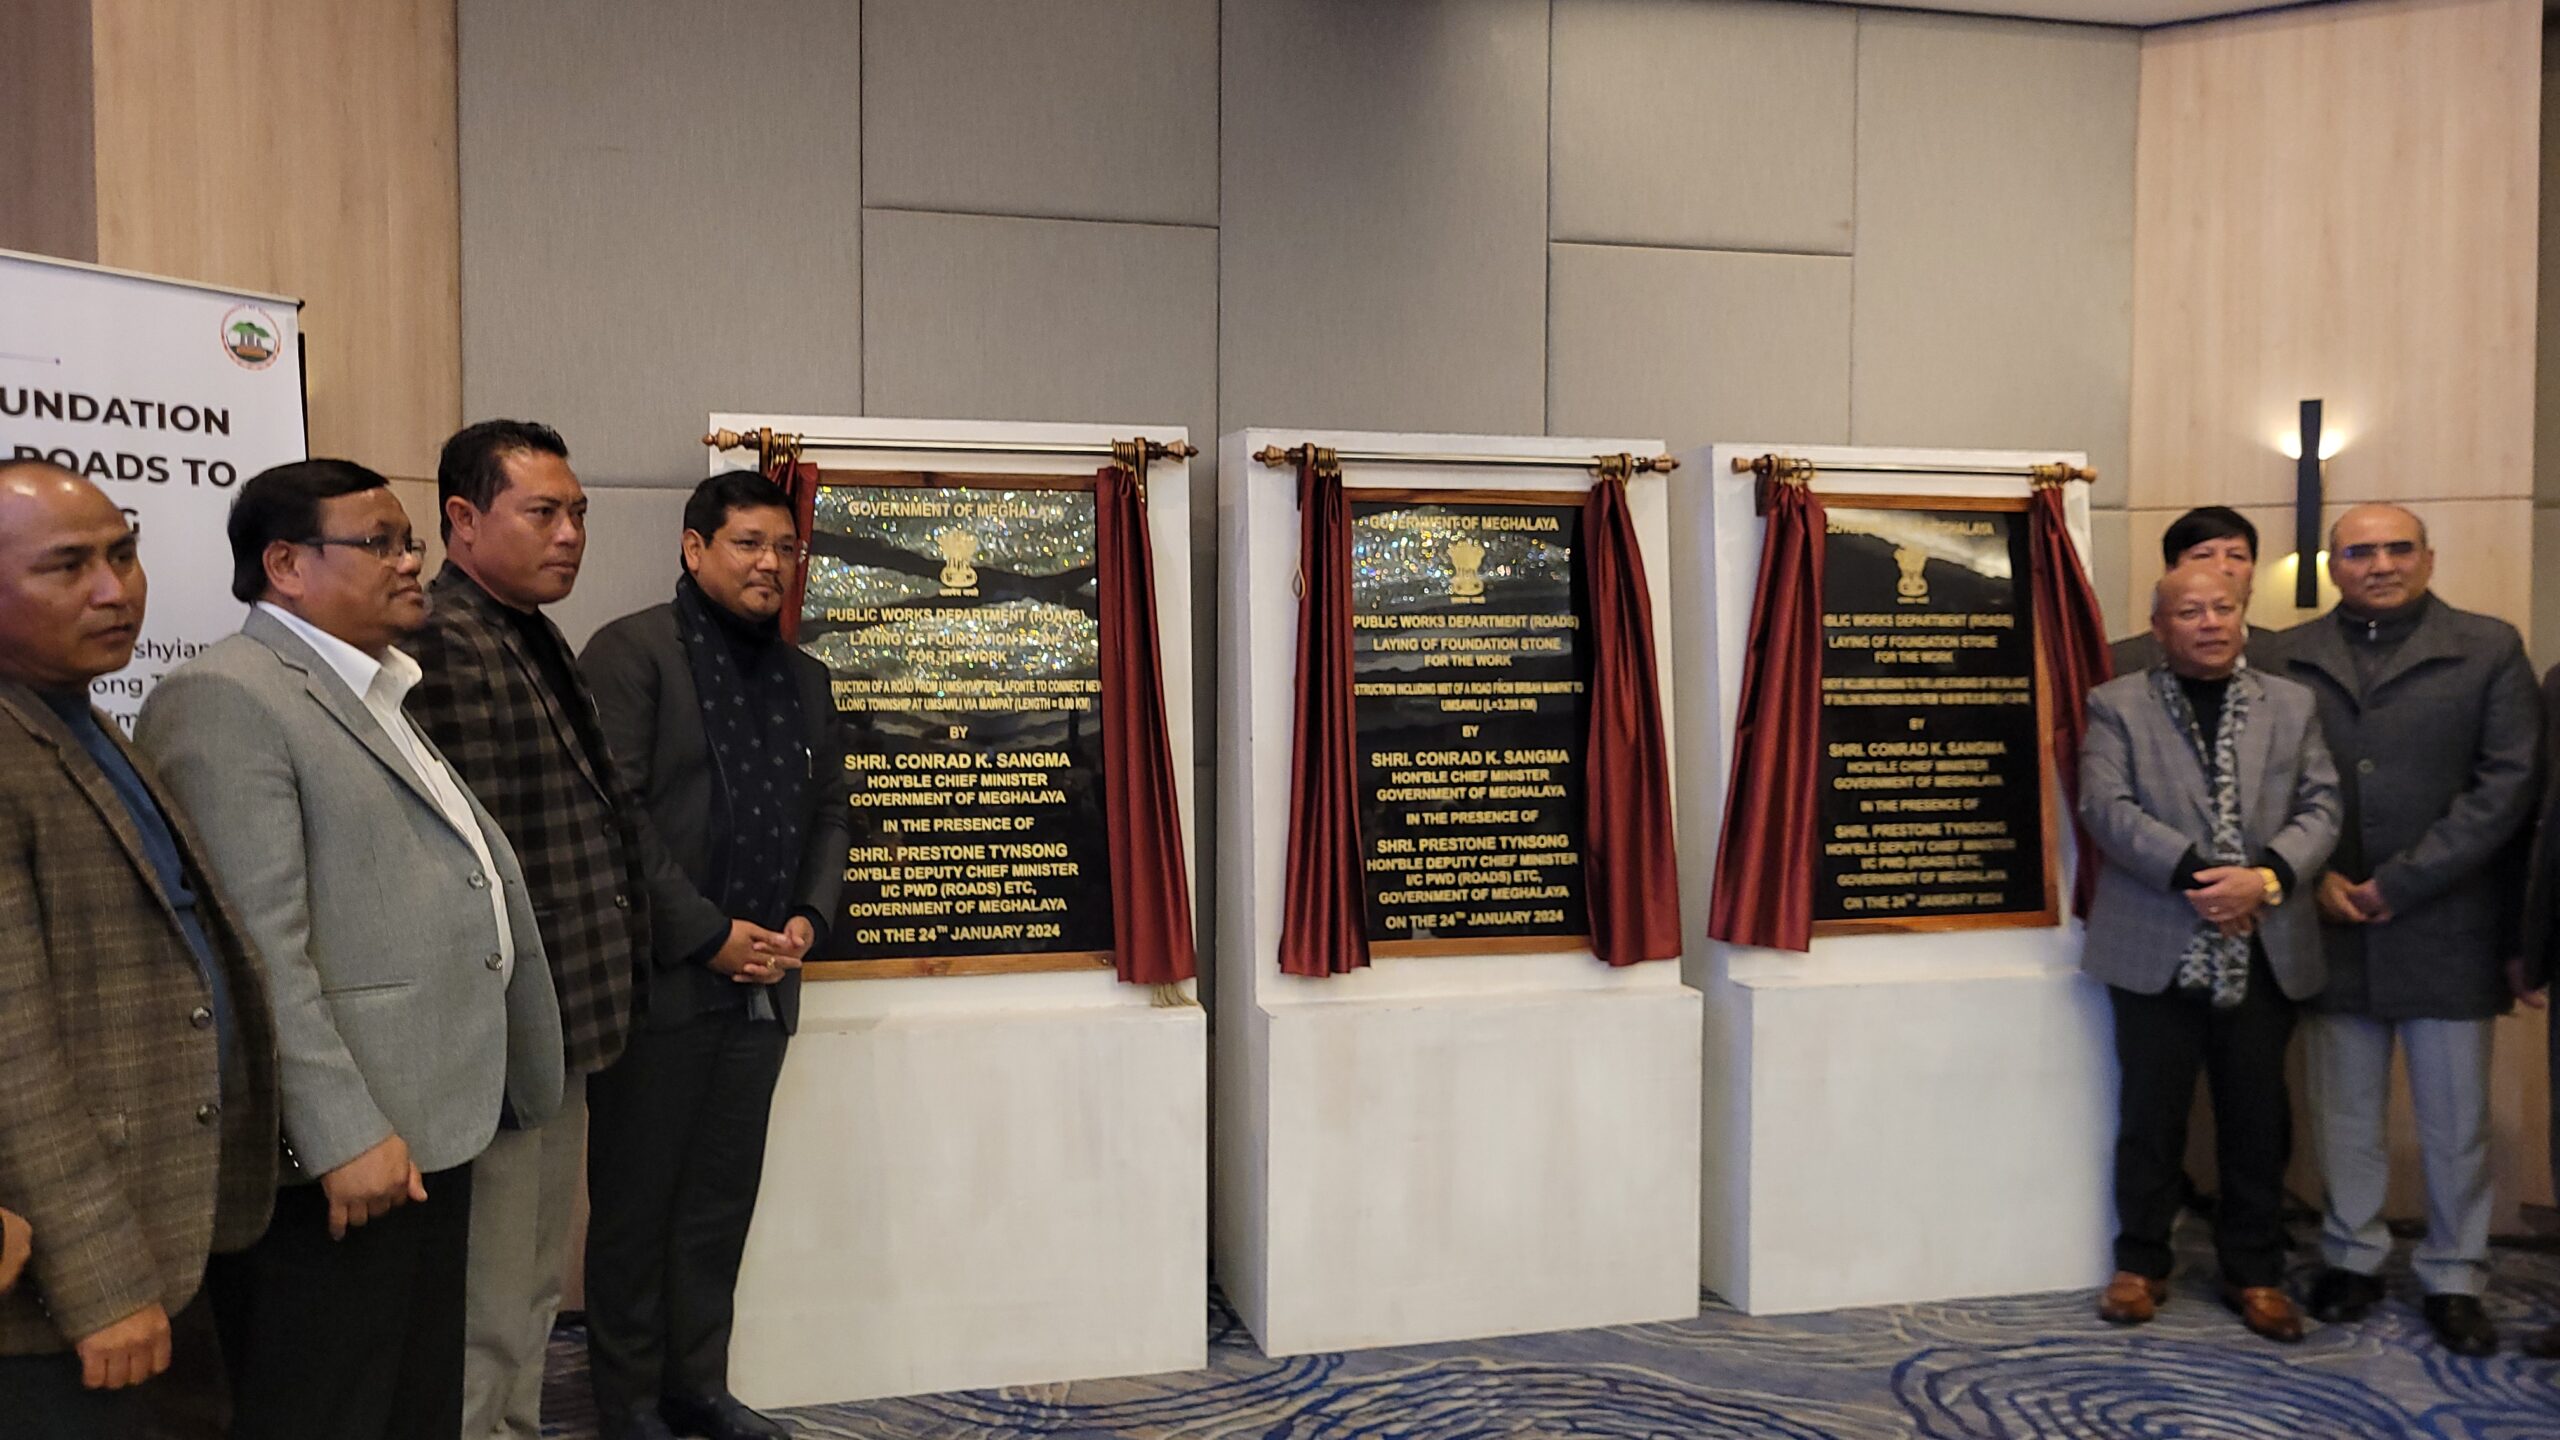 Meghalaya CM laid foundation stone for 3 road projects